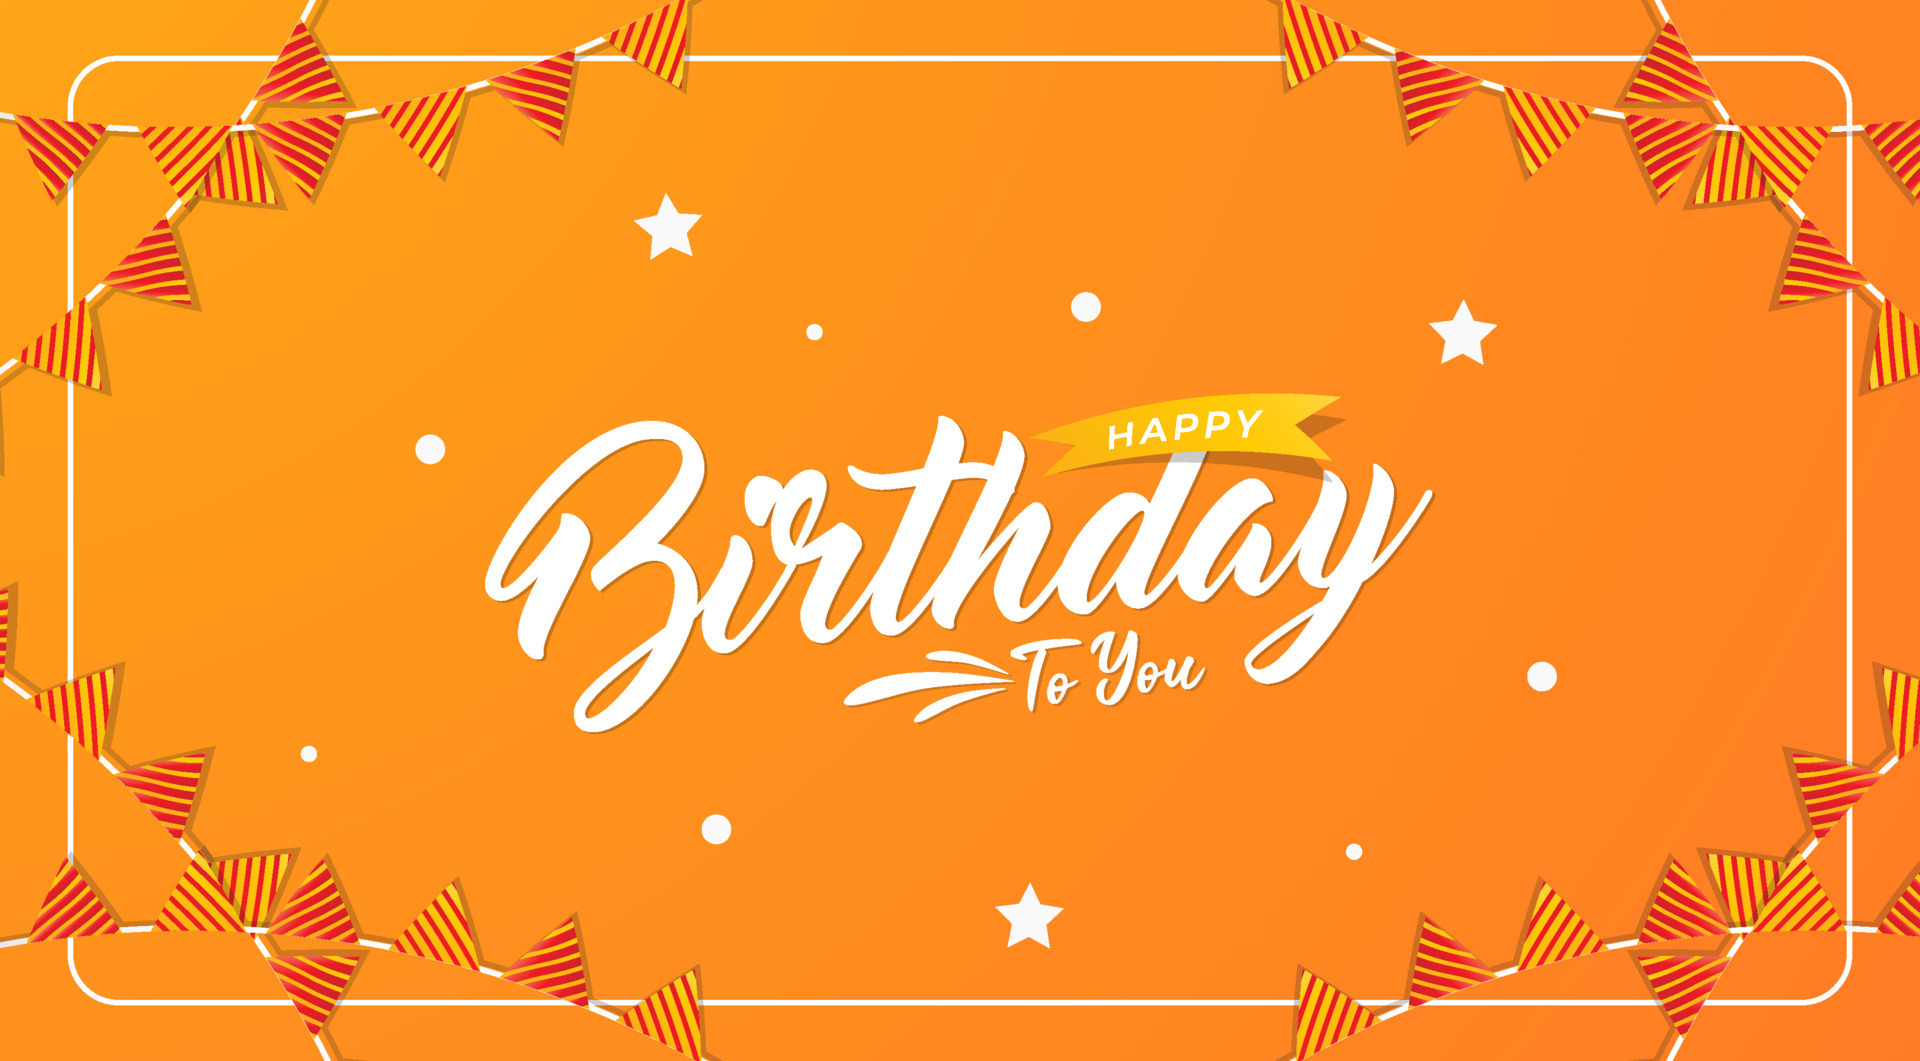 Find 800+ Happy birthday background orange Ideas for Your Greetings and Celebrations